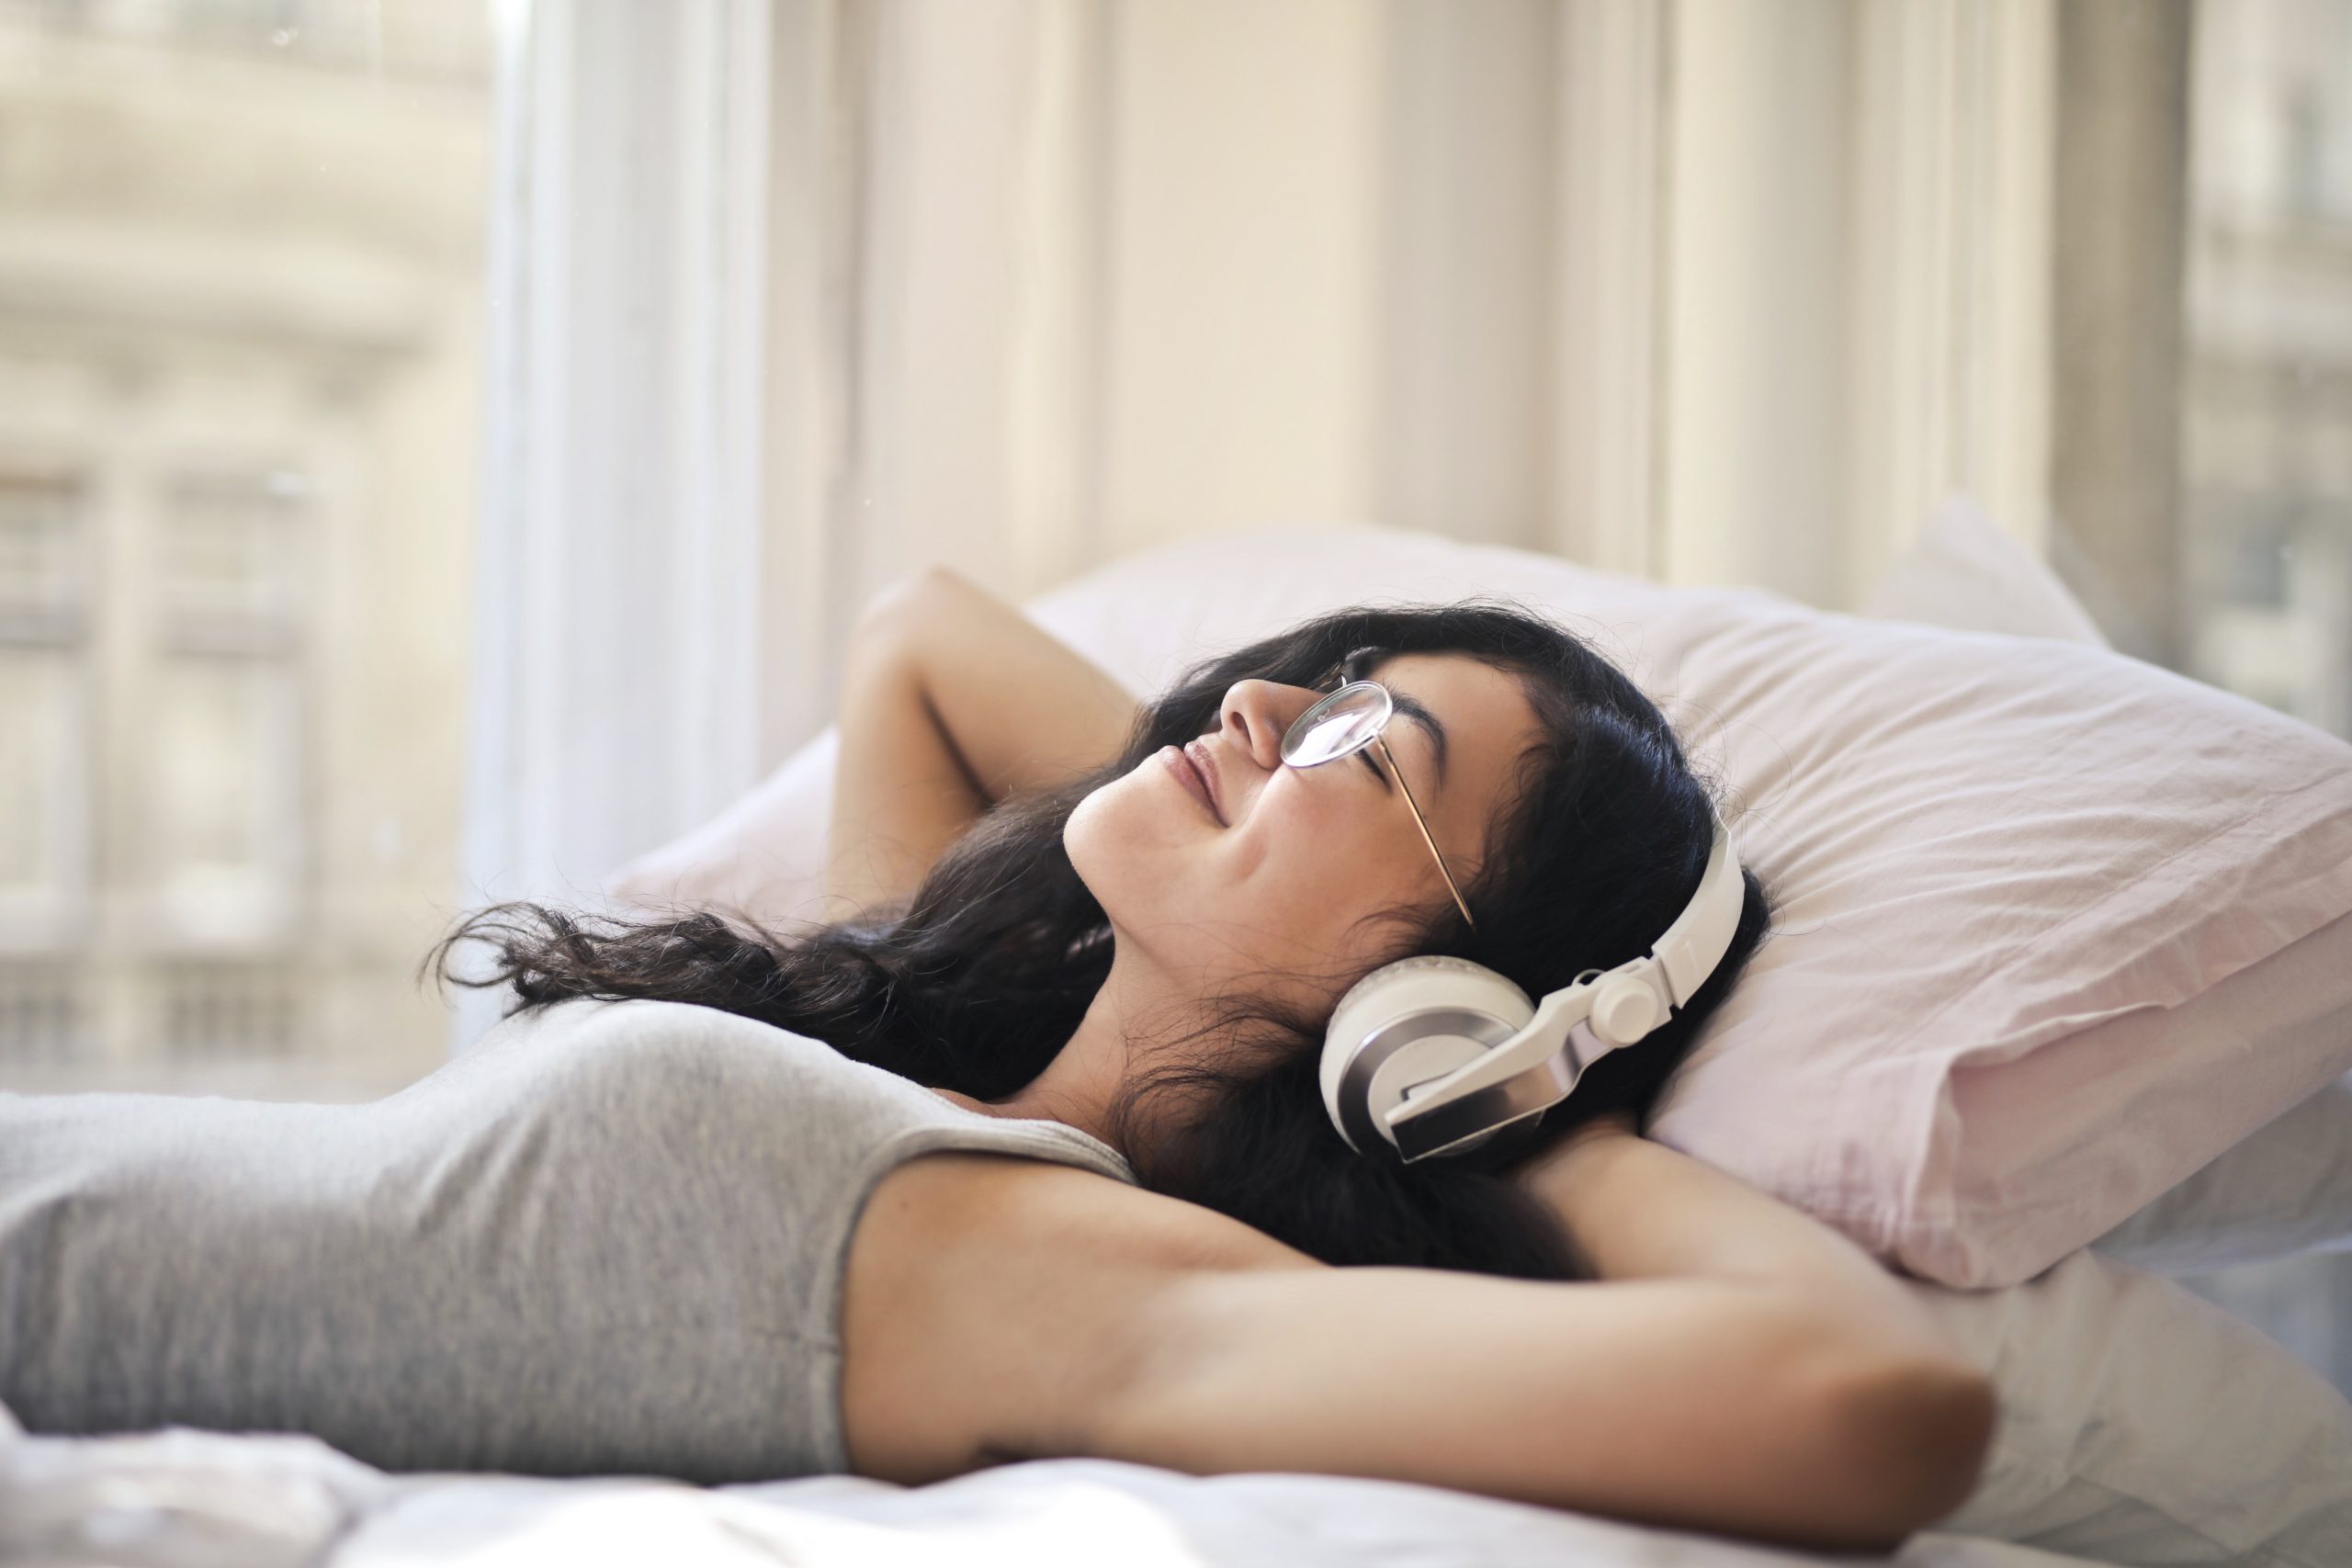 Girl laying on her back in bed wearing headphones and relaxing